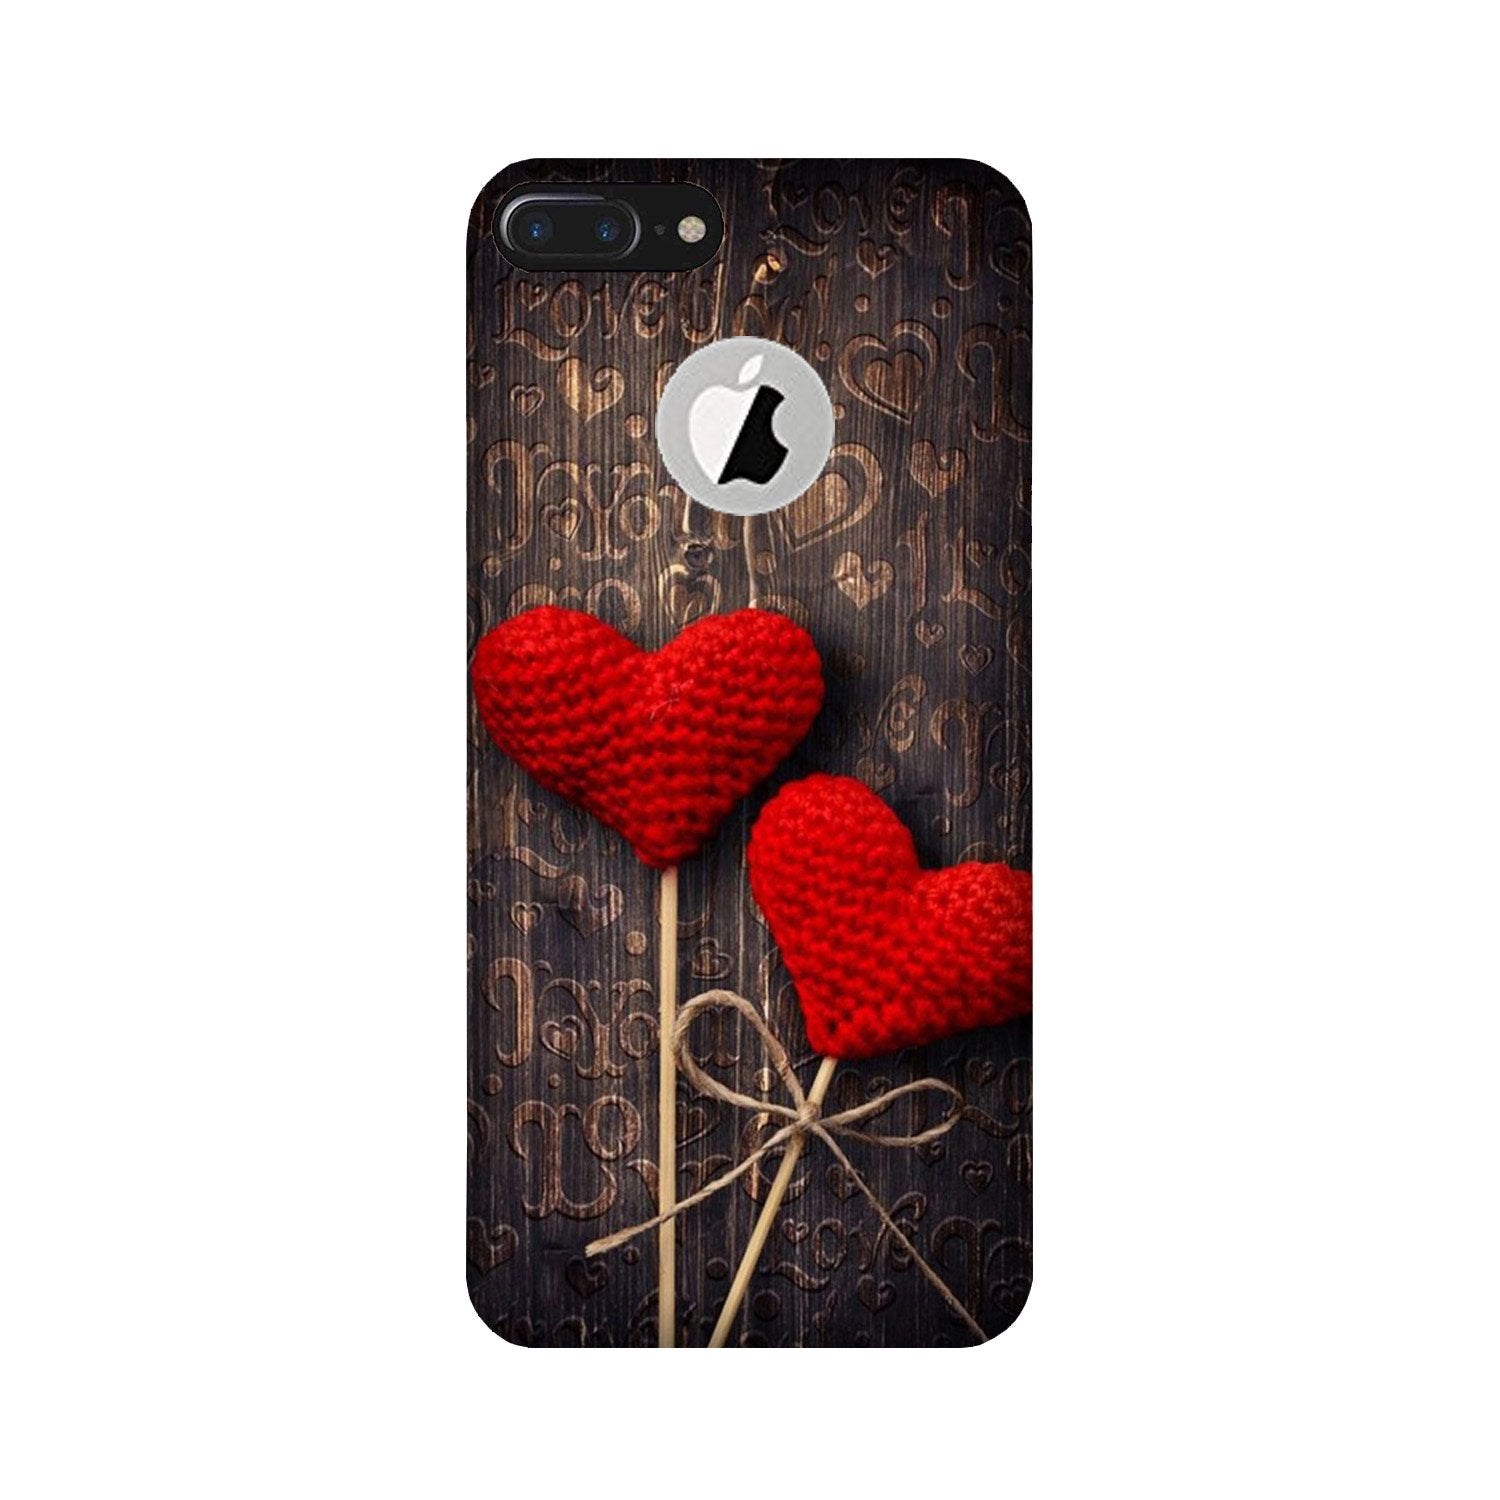 Red Hearts Case for iPhone 7 Plus logo cut